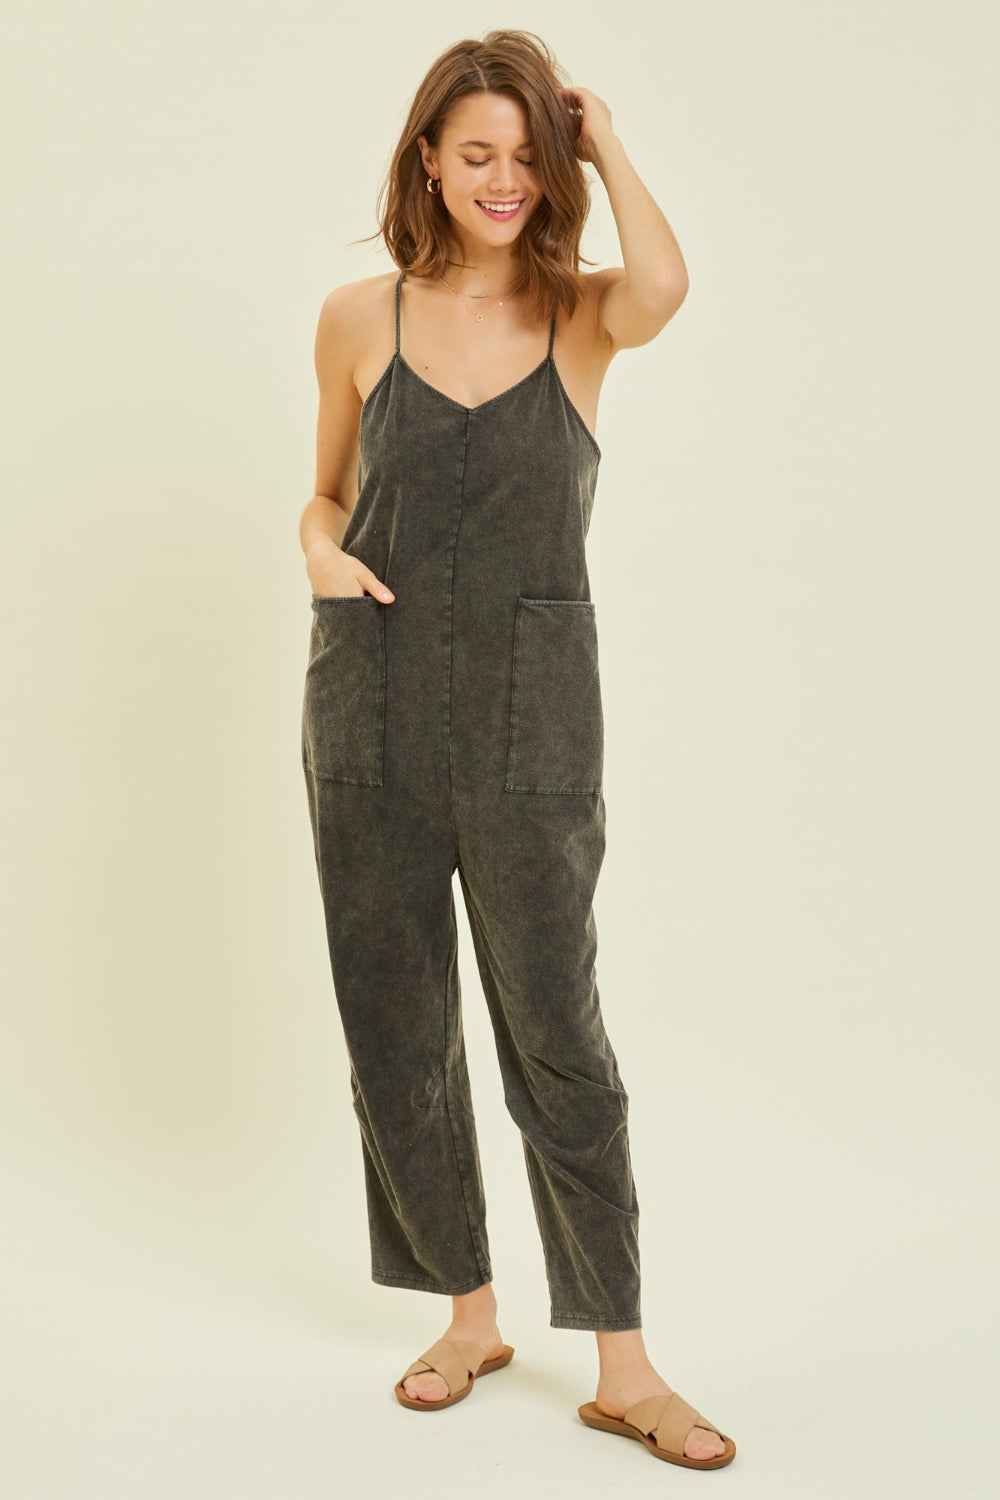 HEYSON Full Size Mineral-Washed Oversized Jumpsuit with Pockets Bottom wear